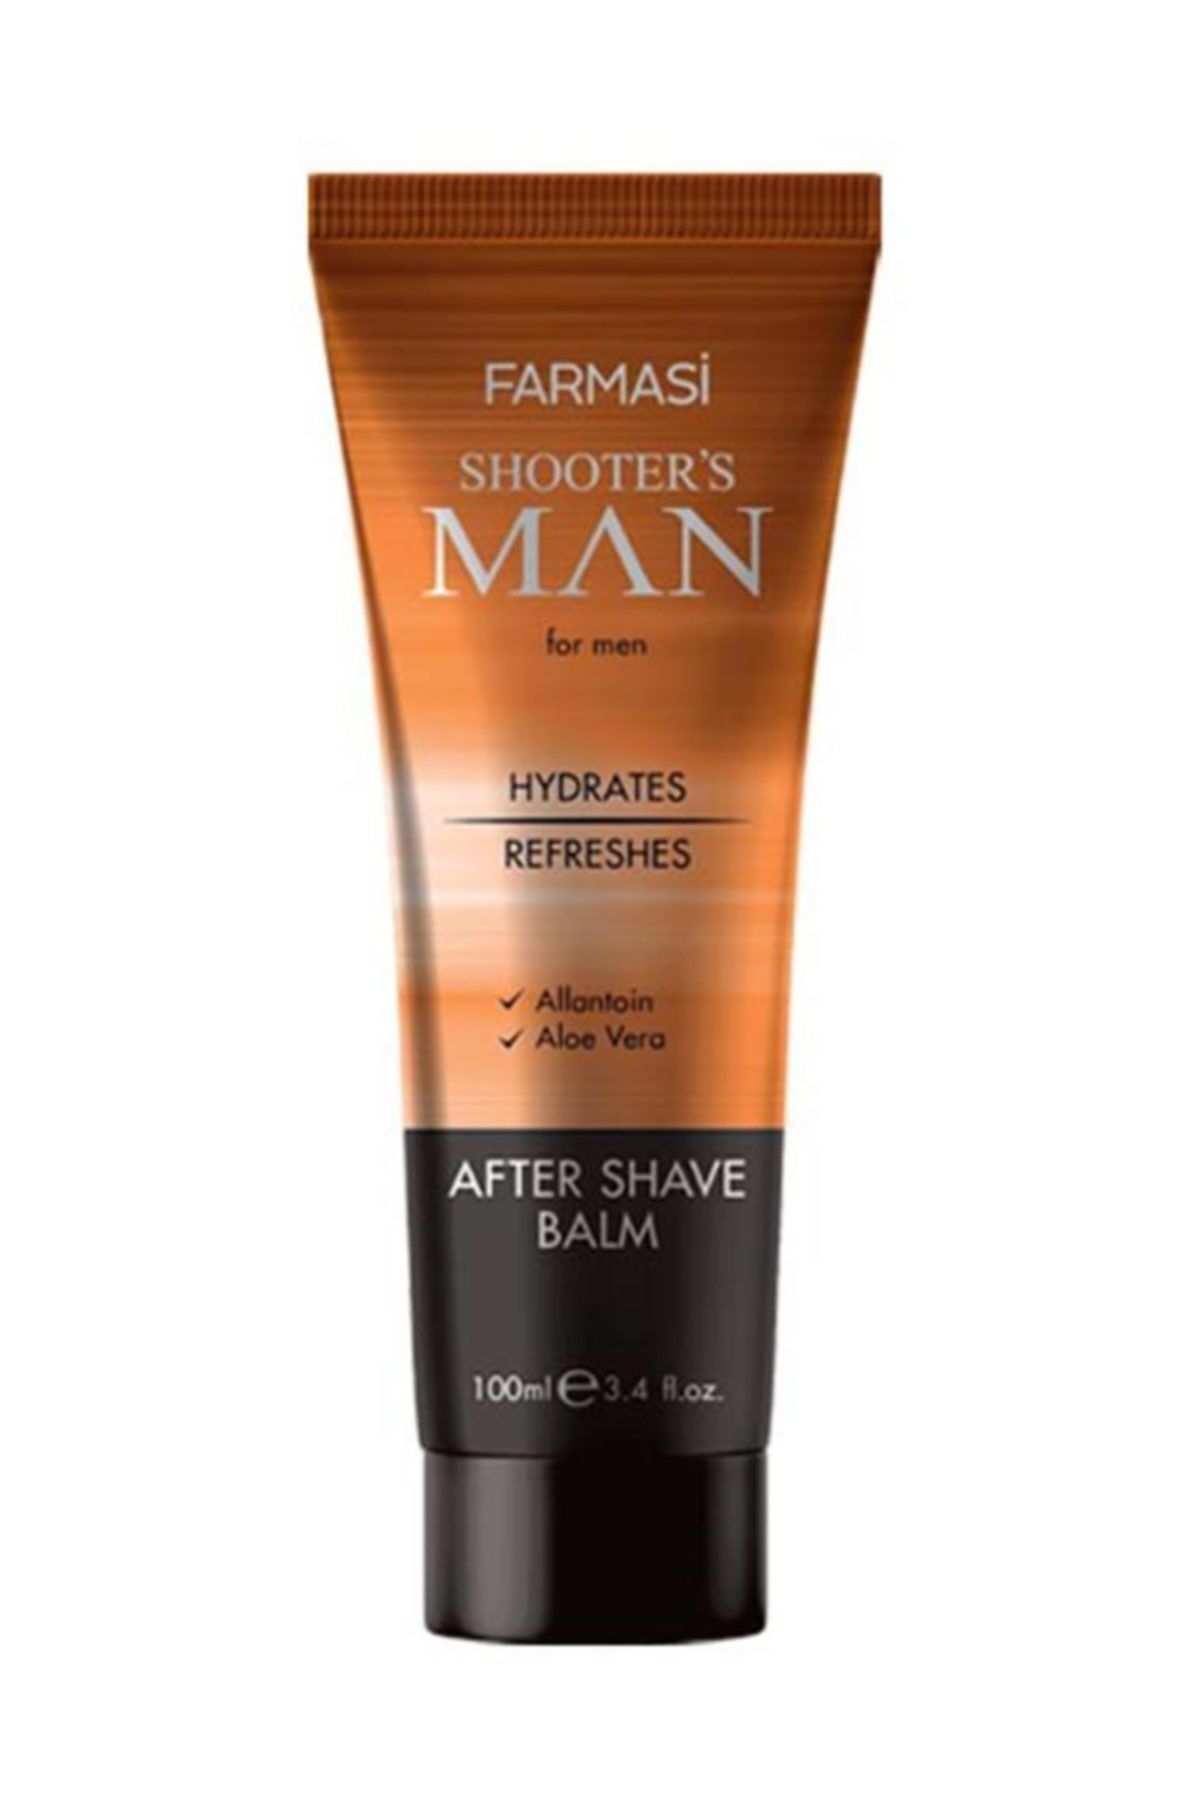 Farmasi 1111071 Shooters Man After Shave Balm Balsam 100ml